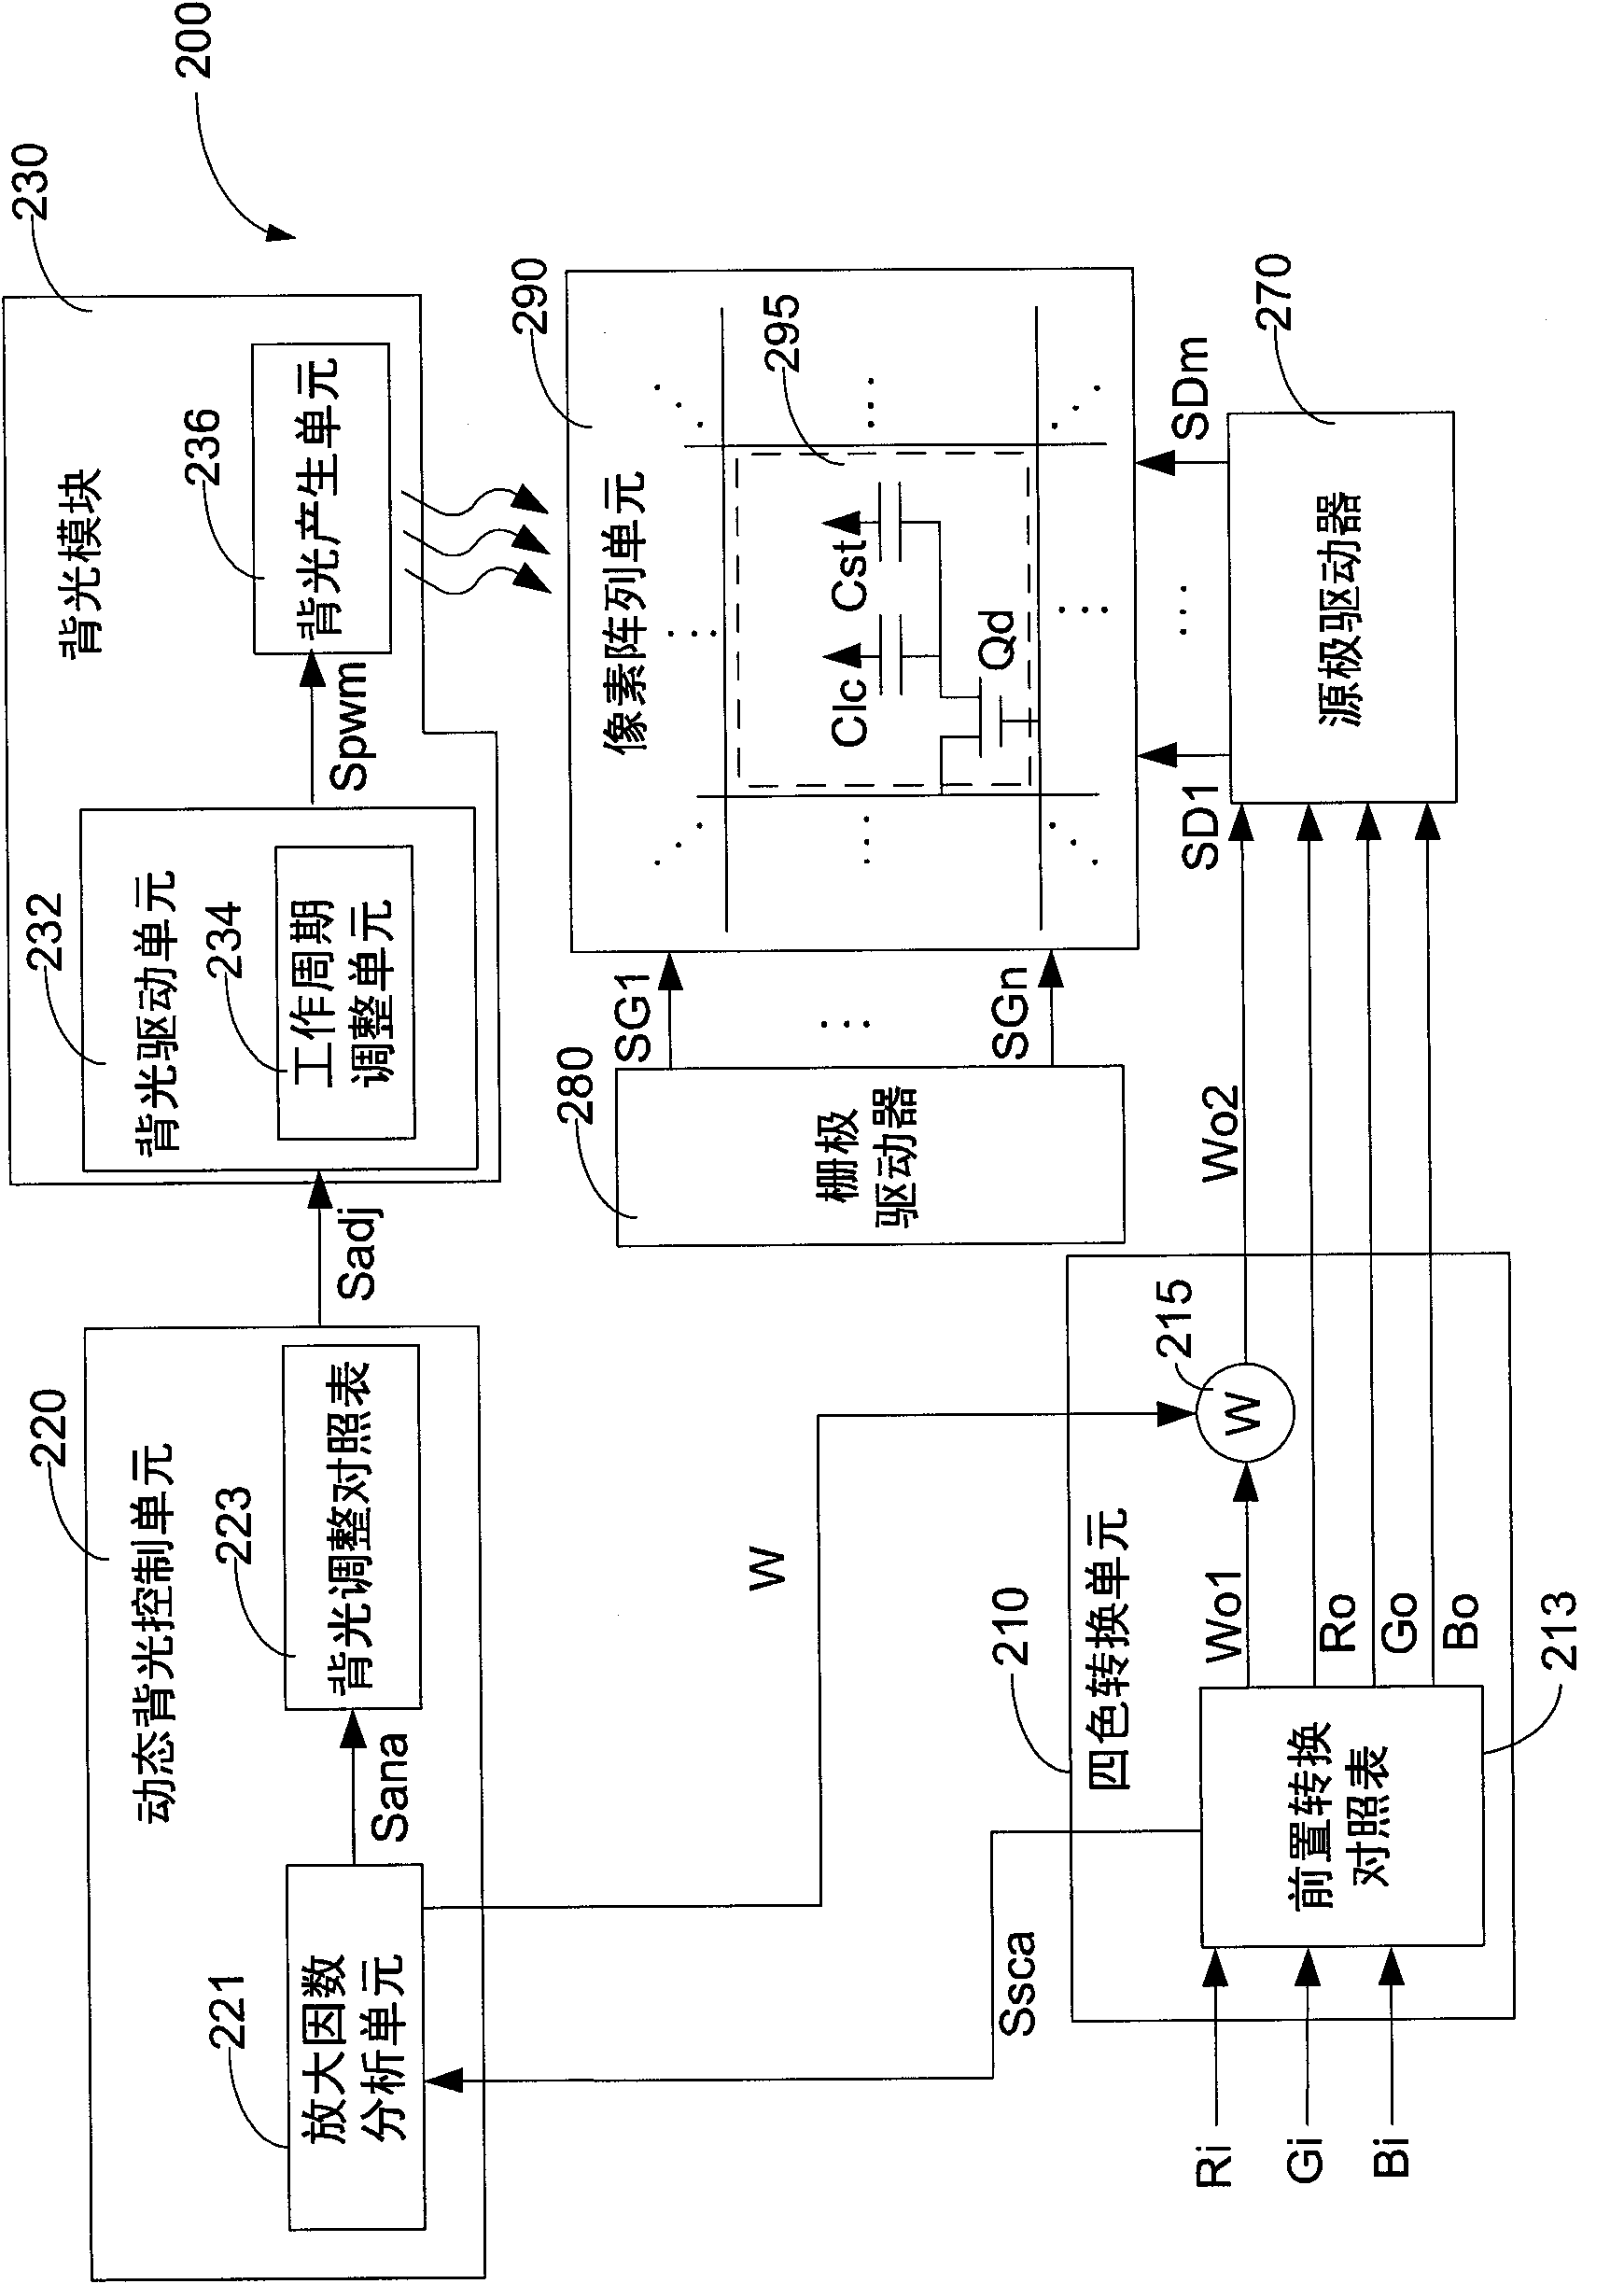 Red-green-blue-white display device and control method